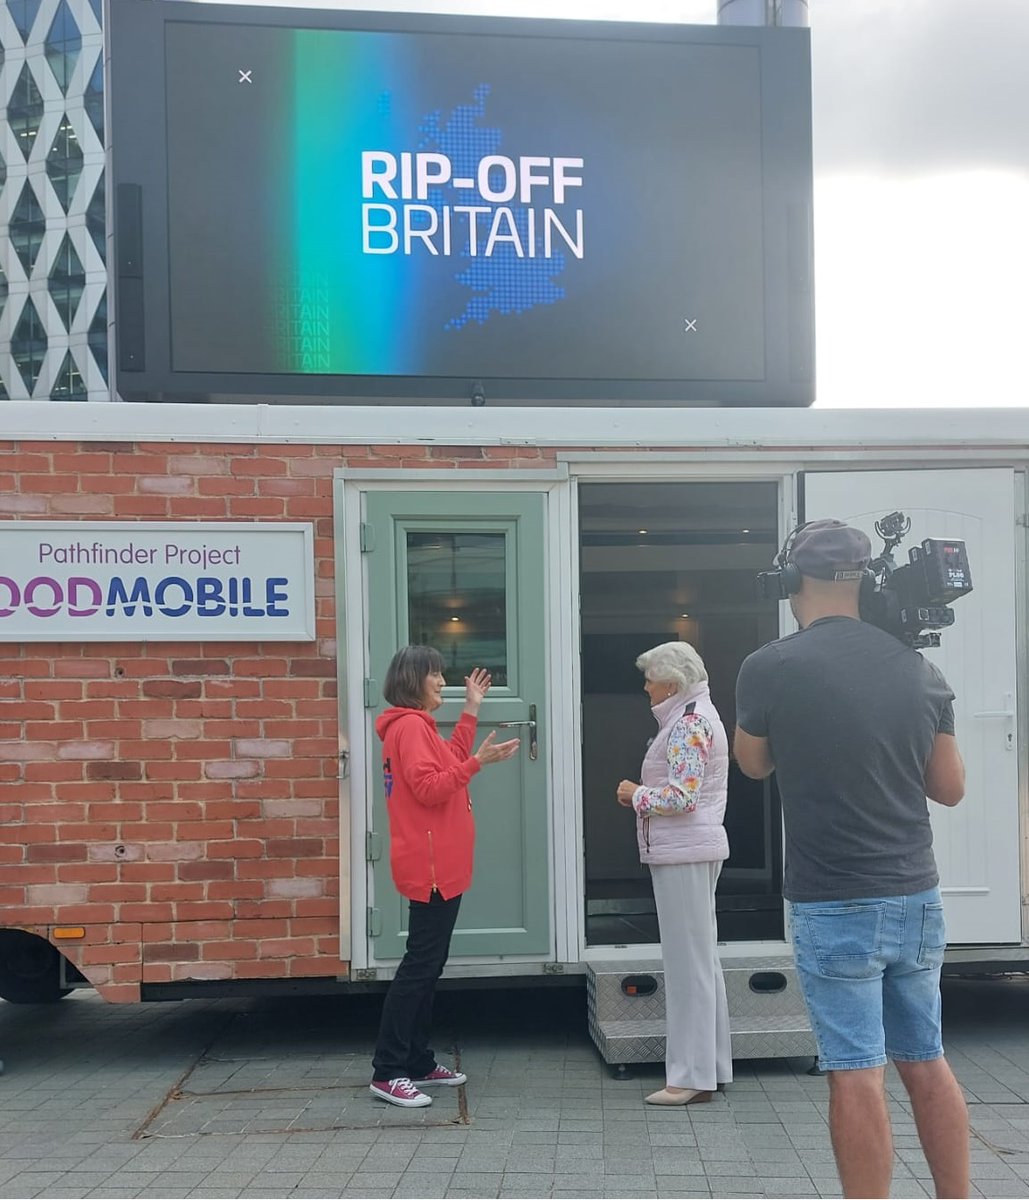 On Thurs 5th Oct @floodmary is talking to presenting legend & #Strictly contestant #AngelaRippon on BBC’s Rip Off Britain about #flooding & recoverable repair. With a tour of the Floodmobile, Mary hopes to inspire viewers who live at flood risk to #befloodready #BBCRipOffBritain